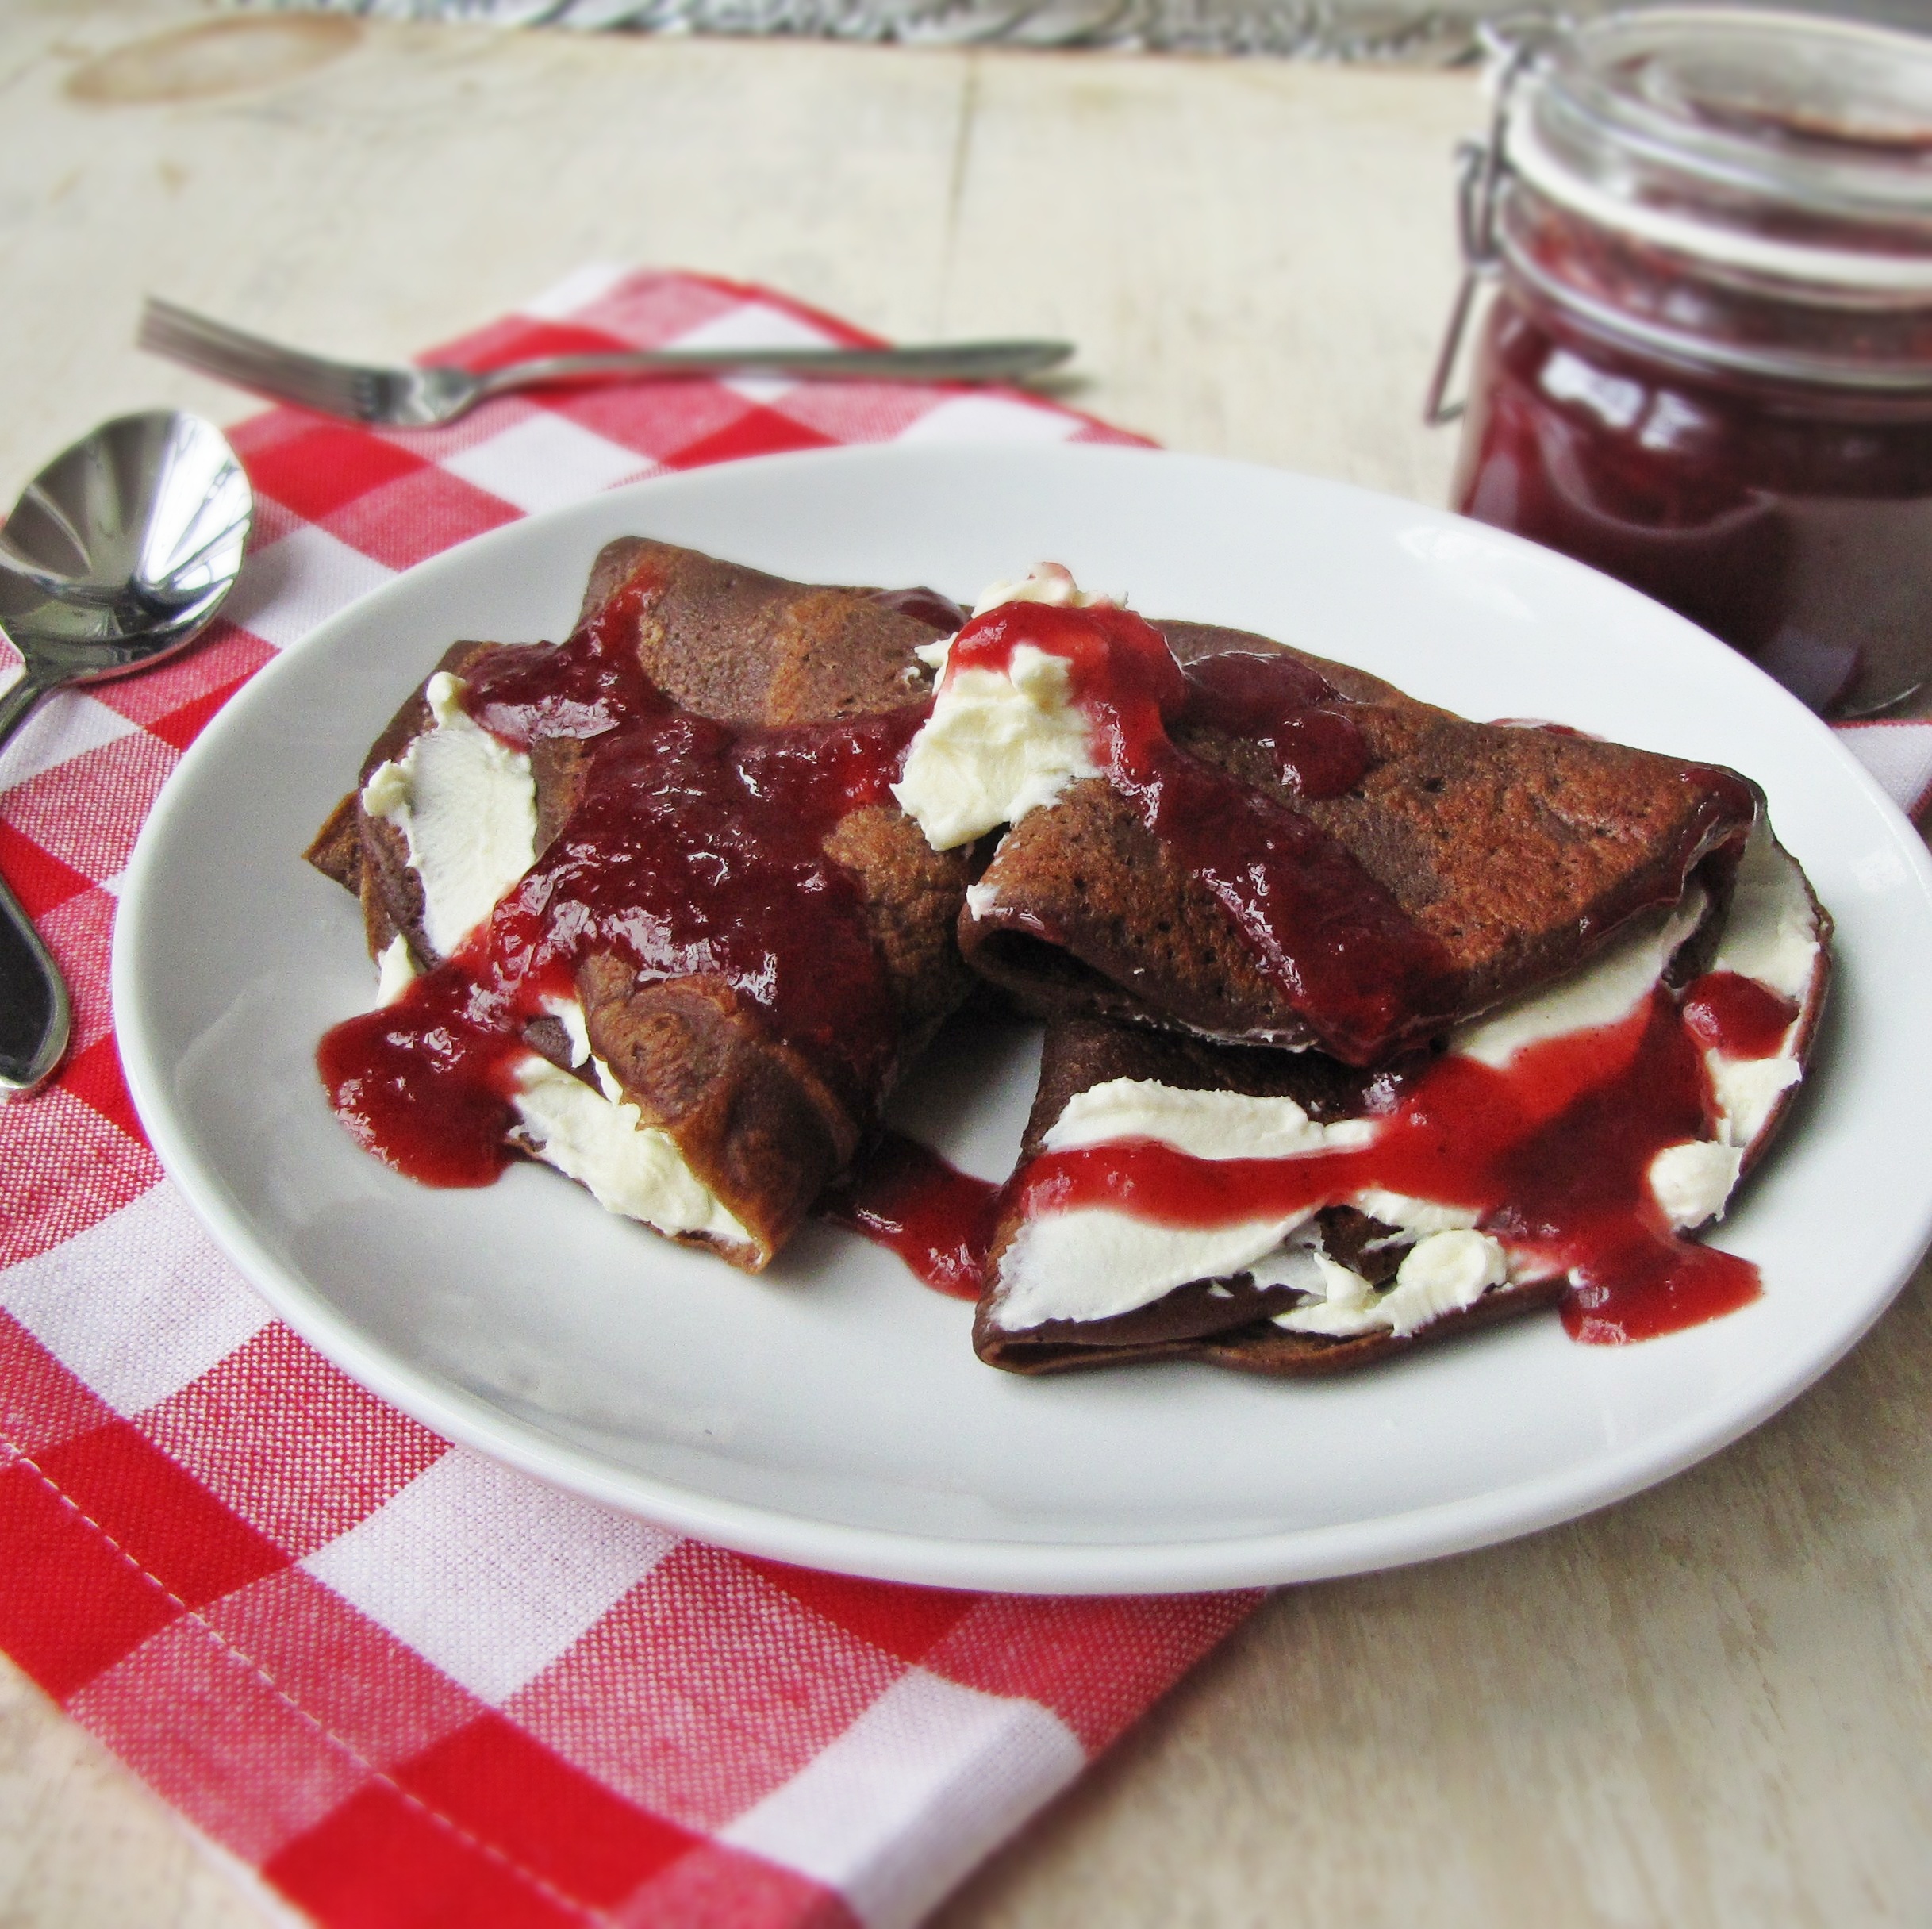 Plum Butter and Chocolate Crepes